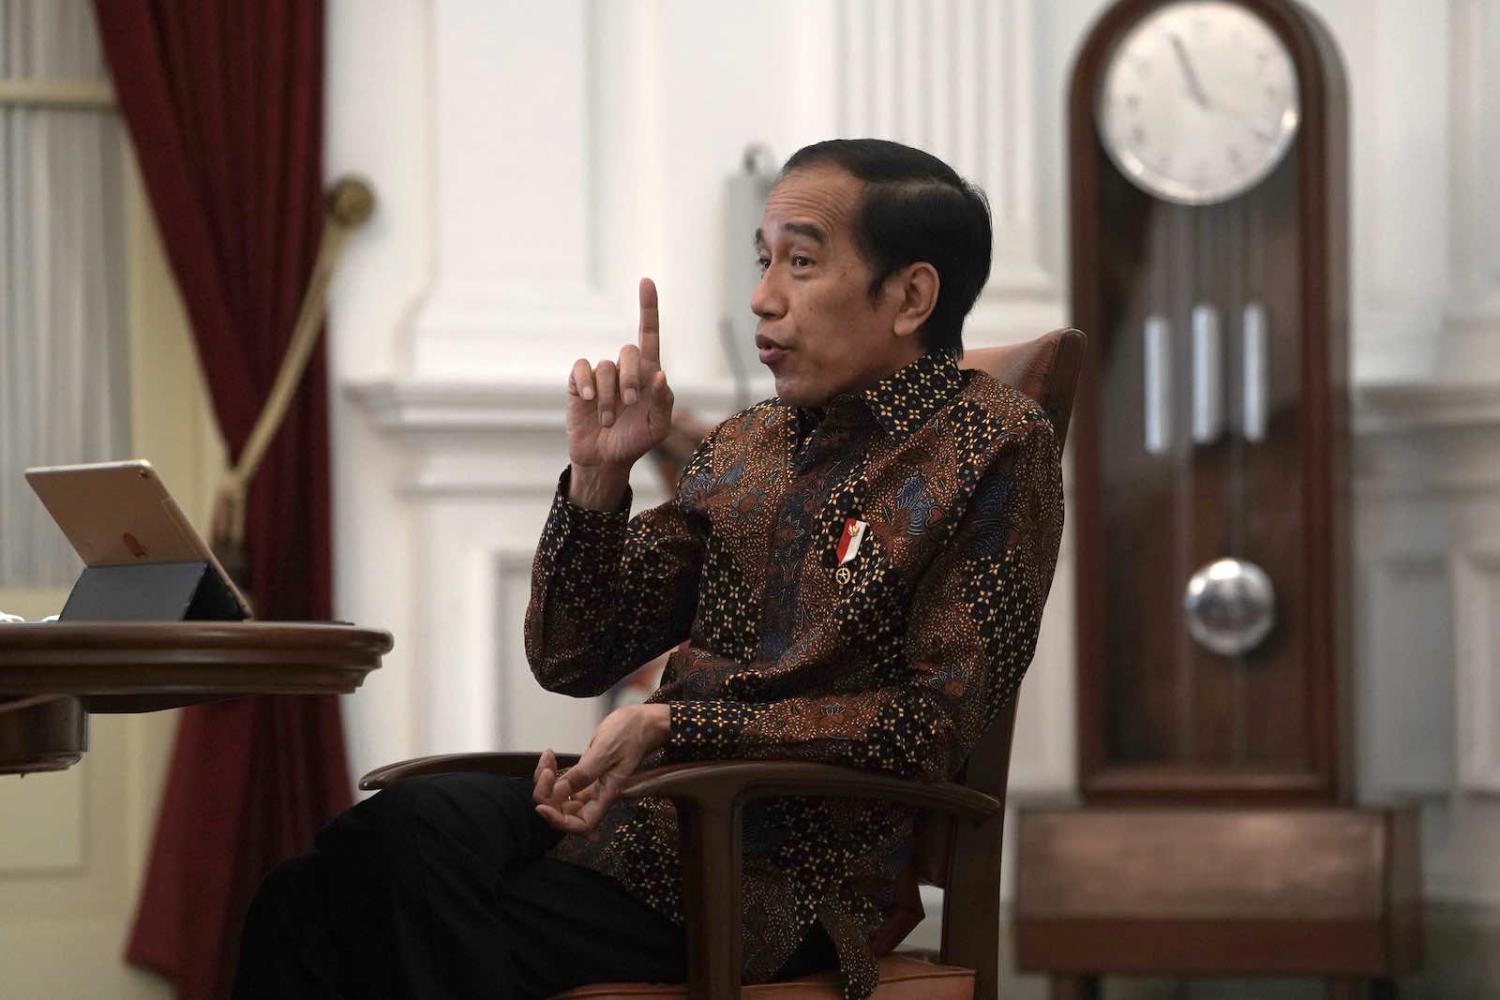 Joko Widodo, Indonesia’s president, has “repeatedly and forcefully” raised concerns about AUKUS with Prime Minister Scott Morrison, according to an ABC report (Dimas Ardian/Bloomberg via Getty Images)